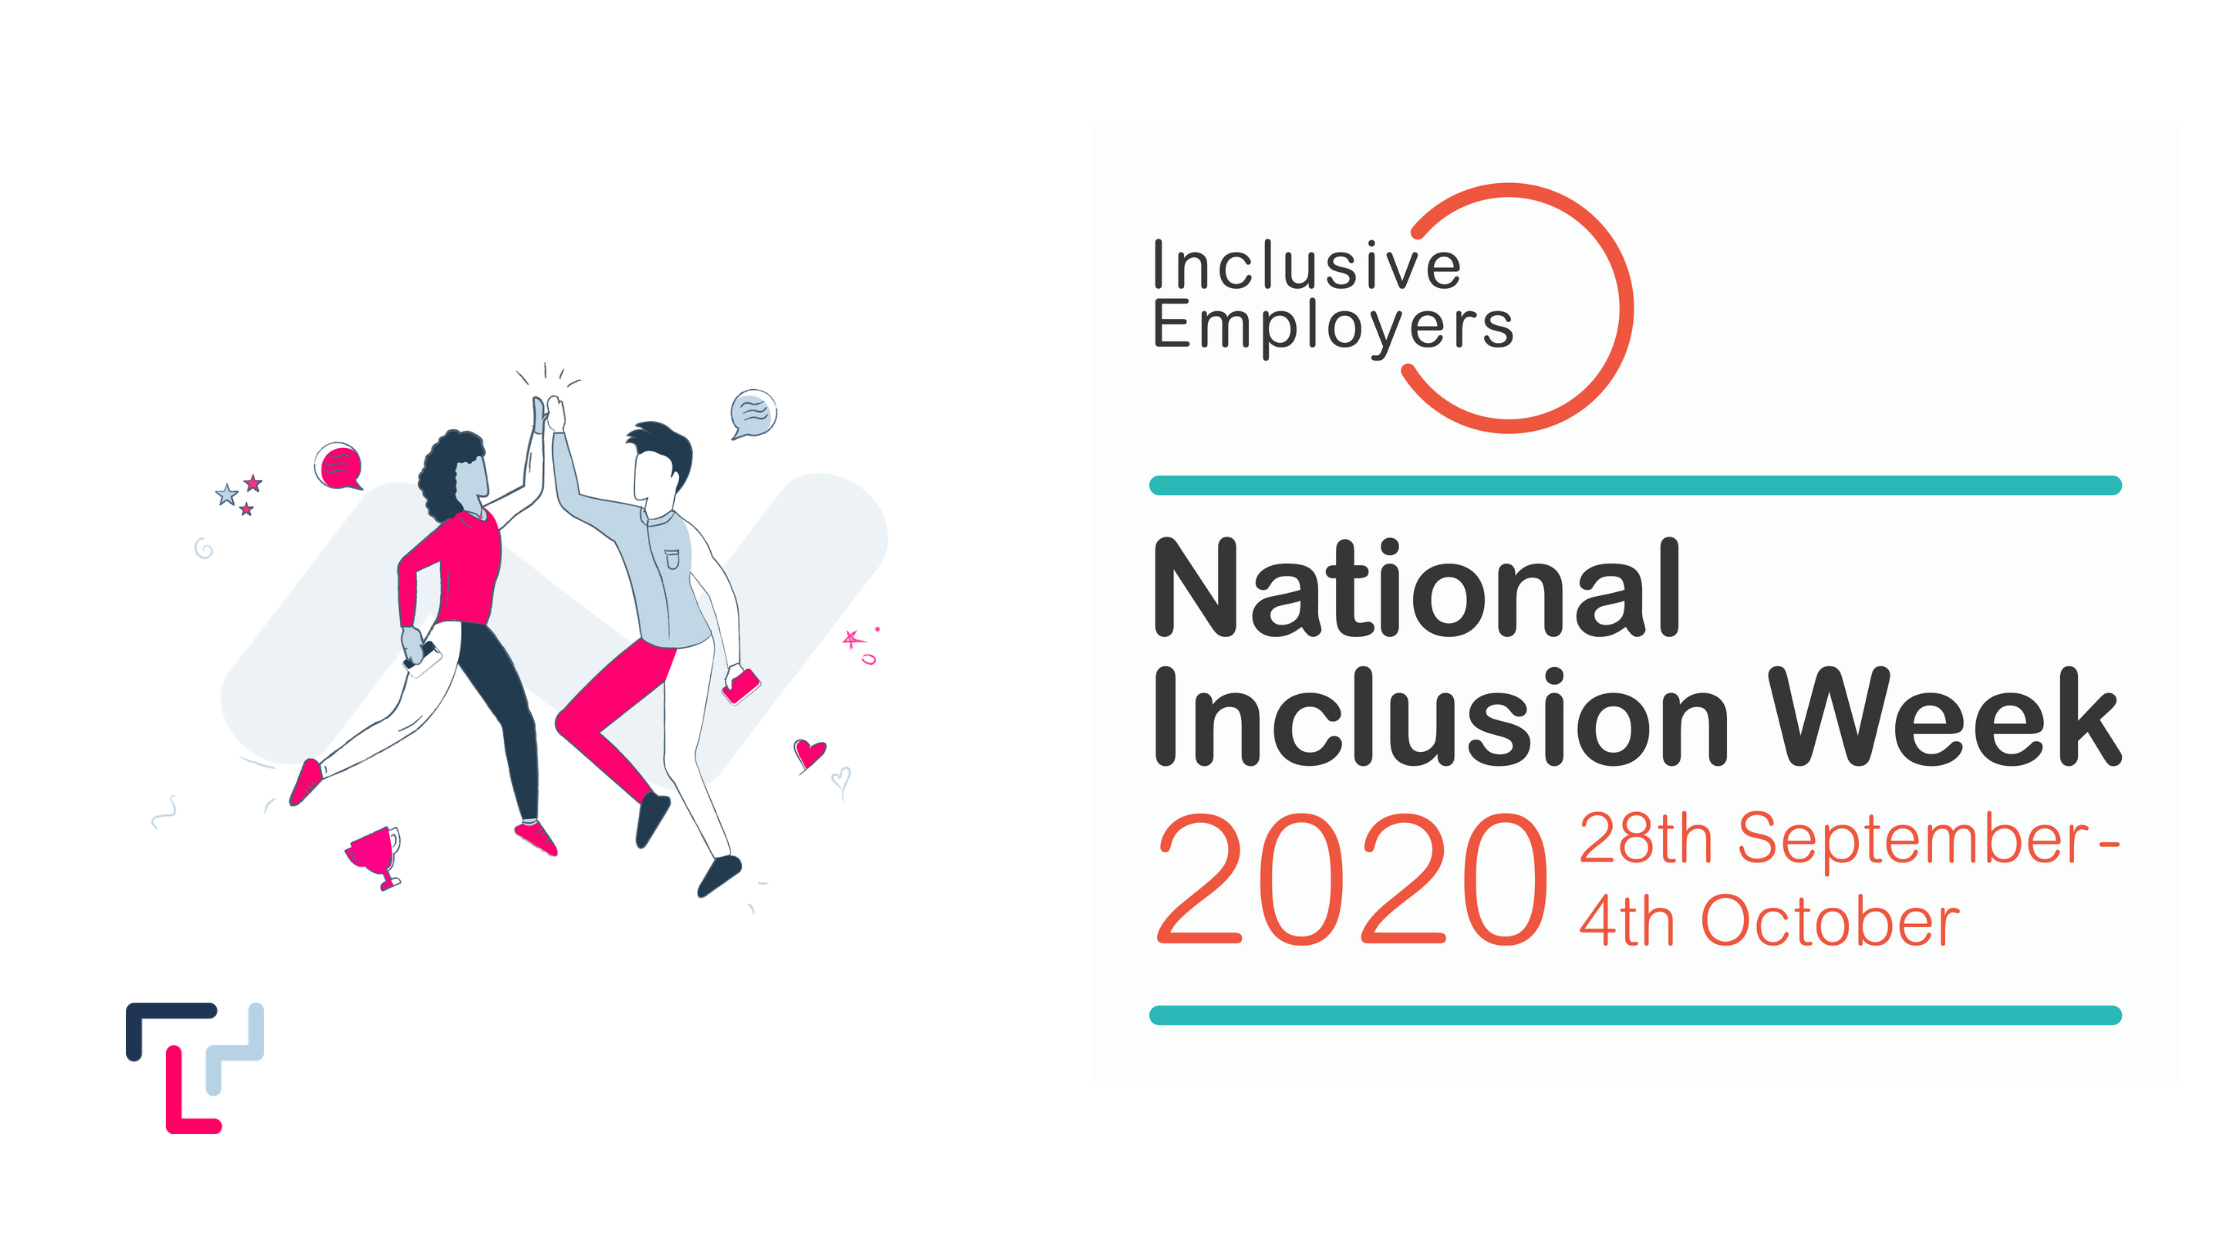 National Inclusion Week 'Each One, Reach One'